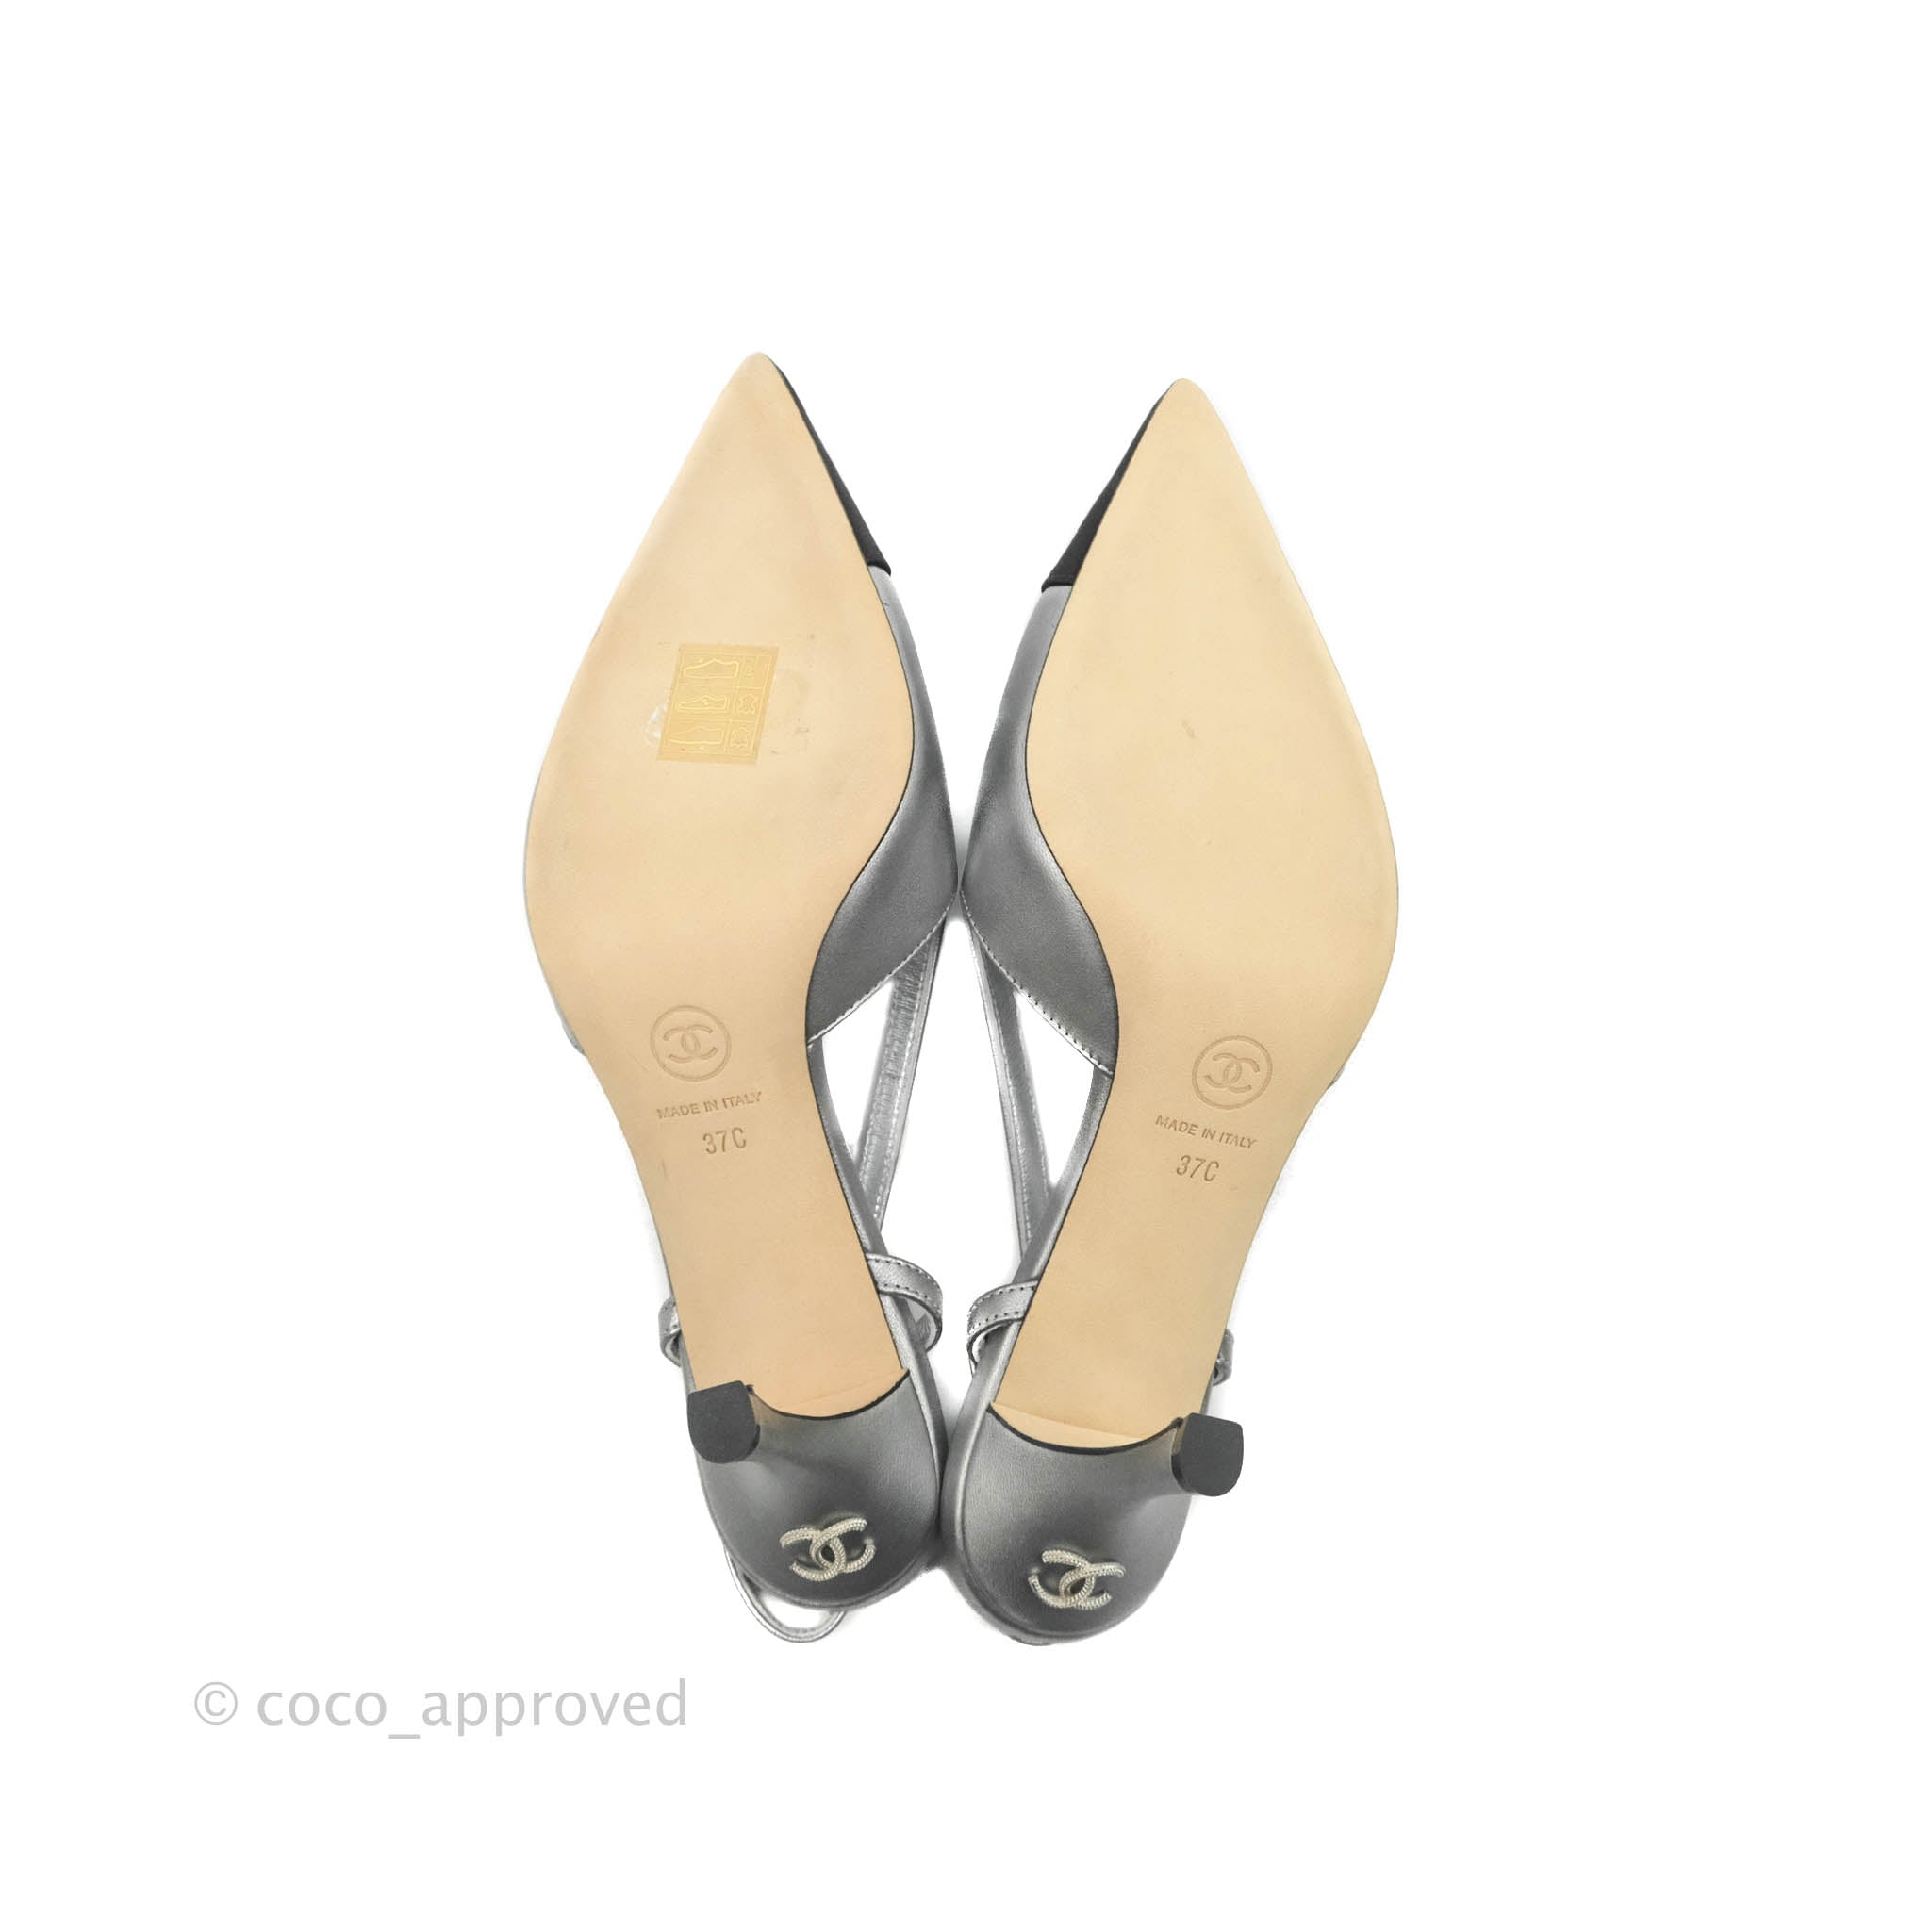 Chanel Pointy Slingback Heels Silver Black Size 37 – Coco Approved Studio